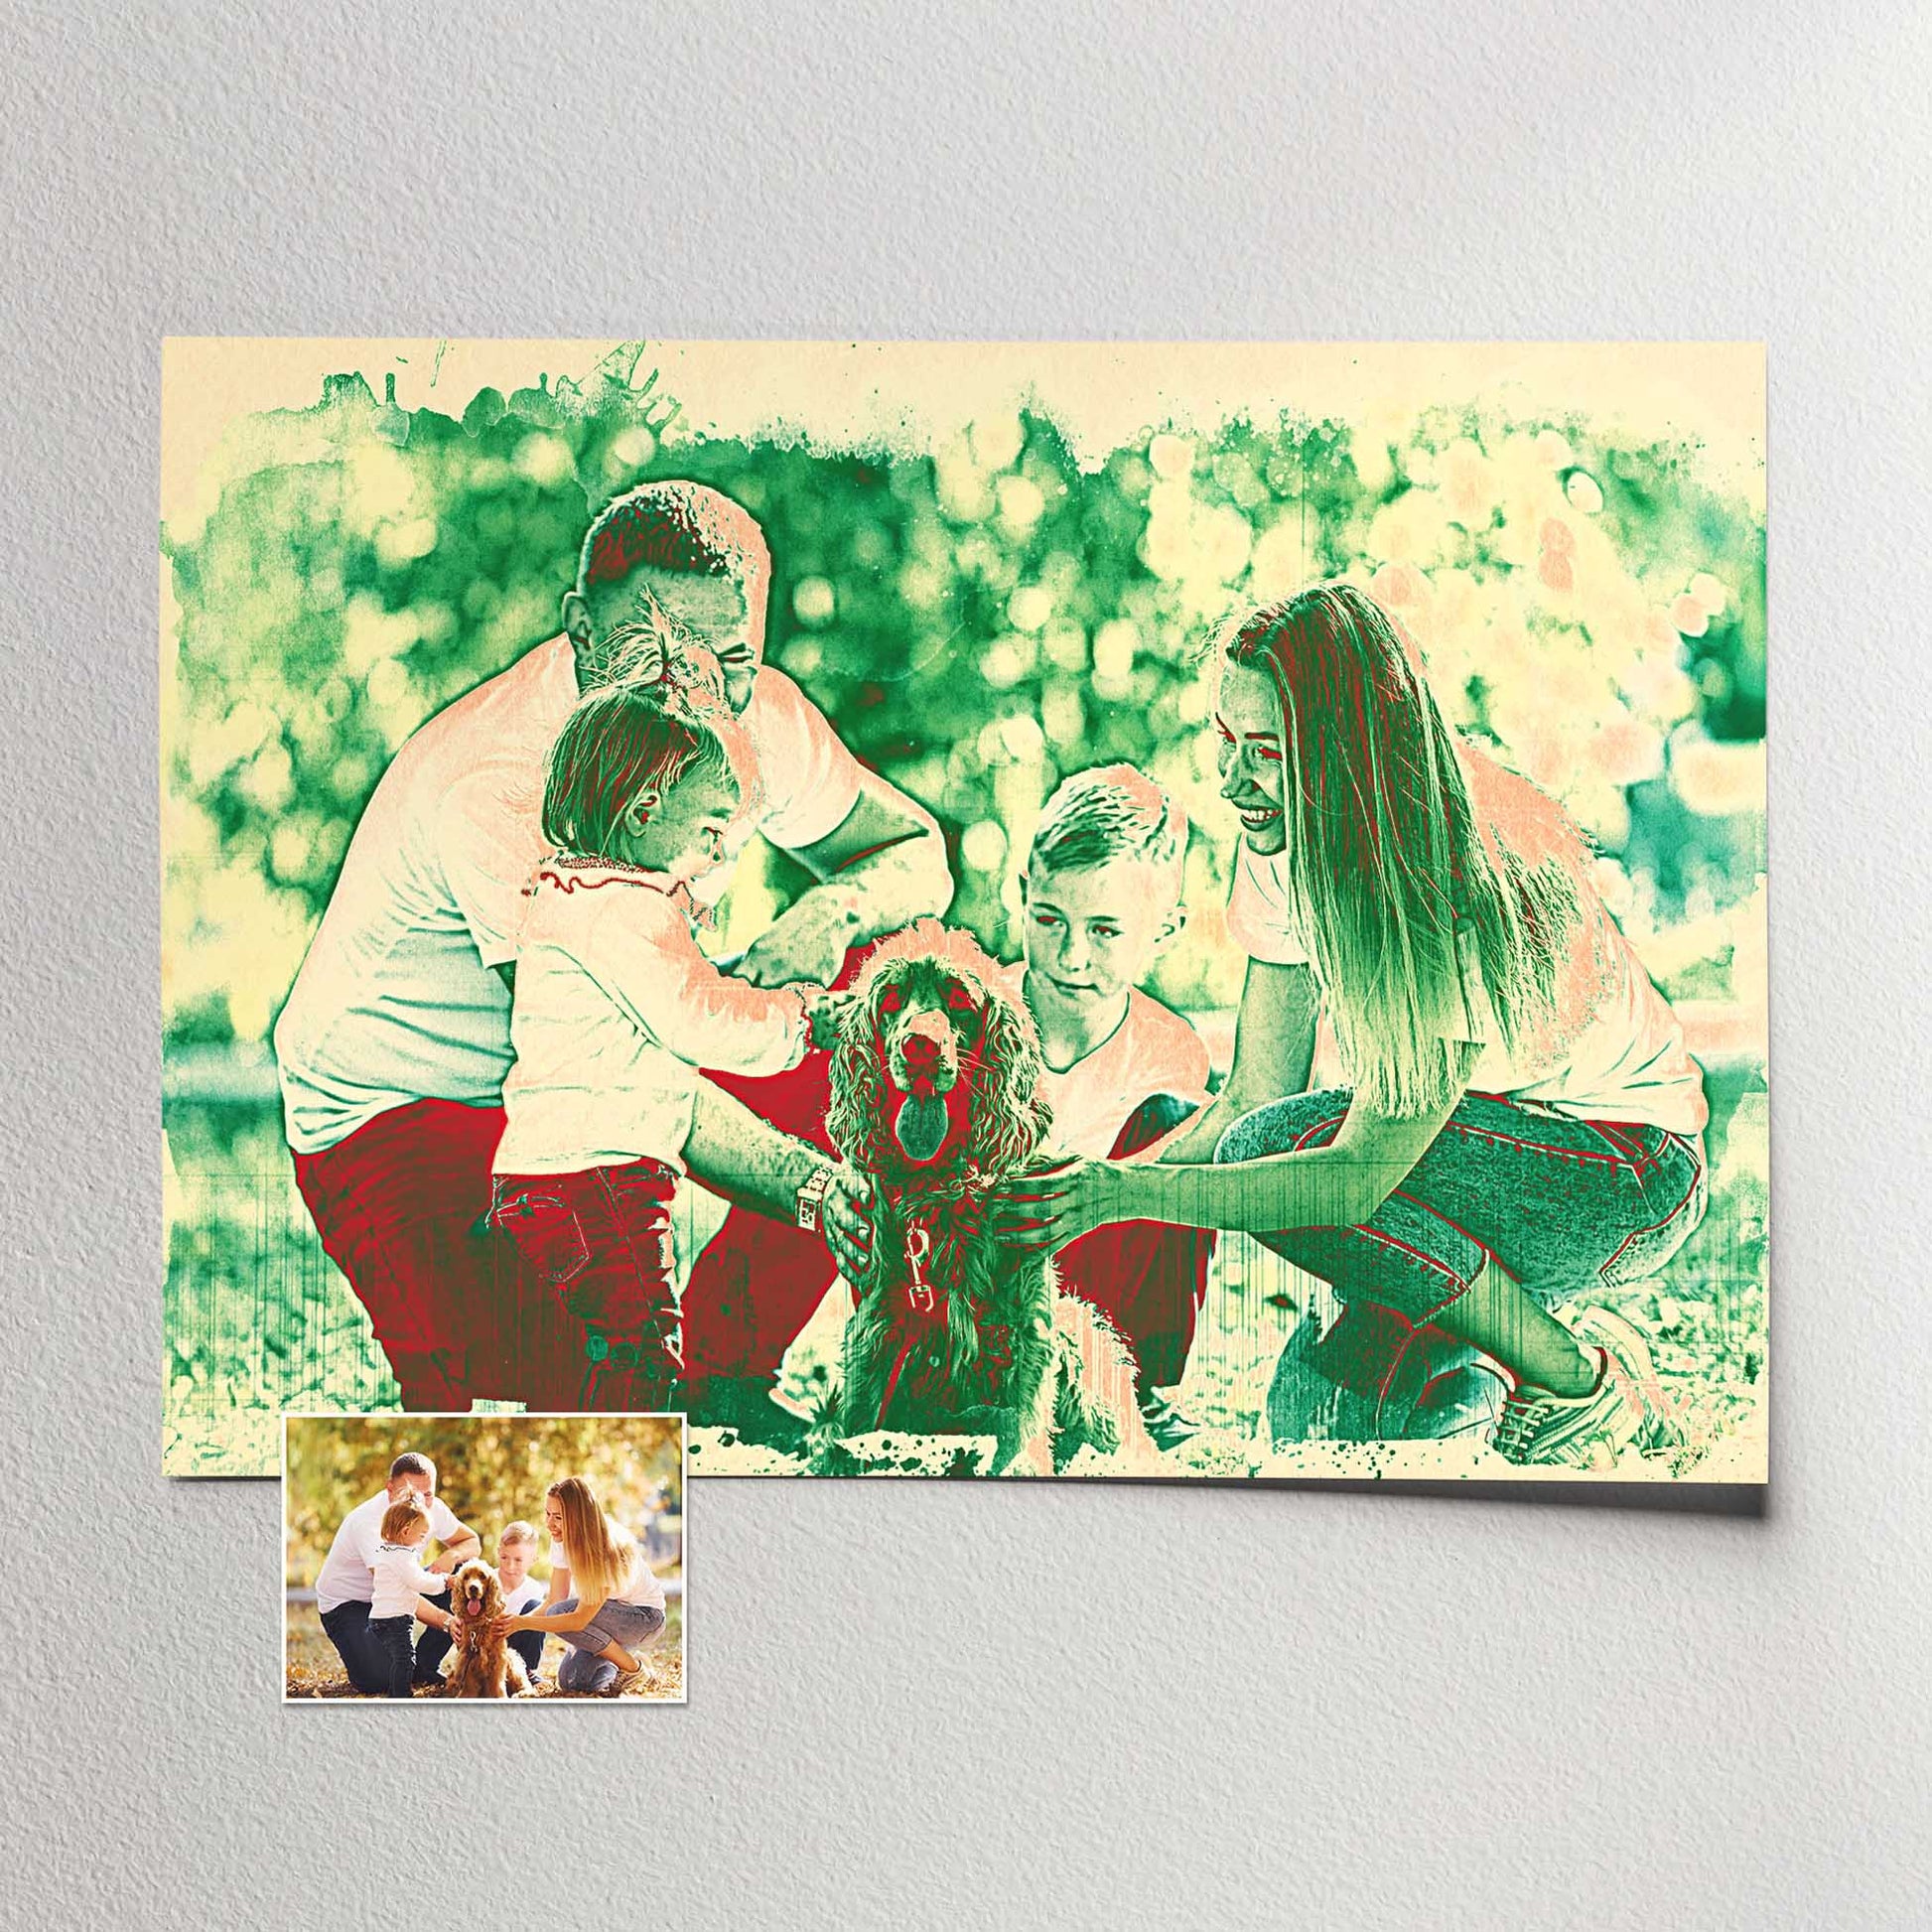 Elevate your home decor with the enchanting allure of our Personalised Green & Red Watercolor Print. This custom-made artwork, painted from your photo, captures the realistic watercolor style with green and red hues that evoke a sense of comfort